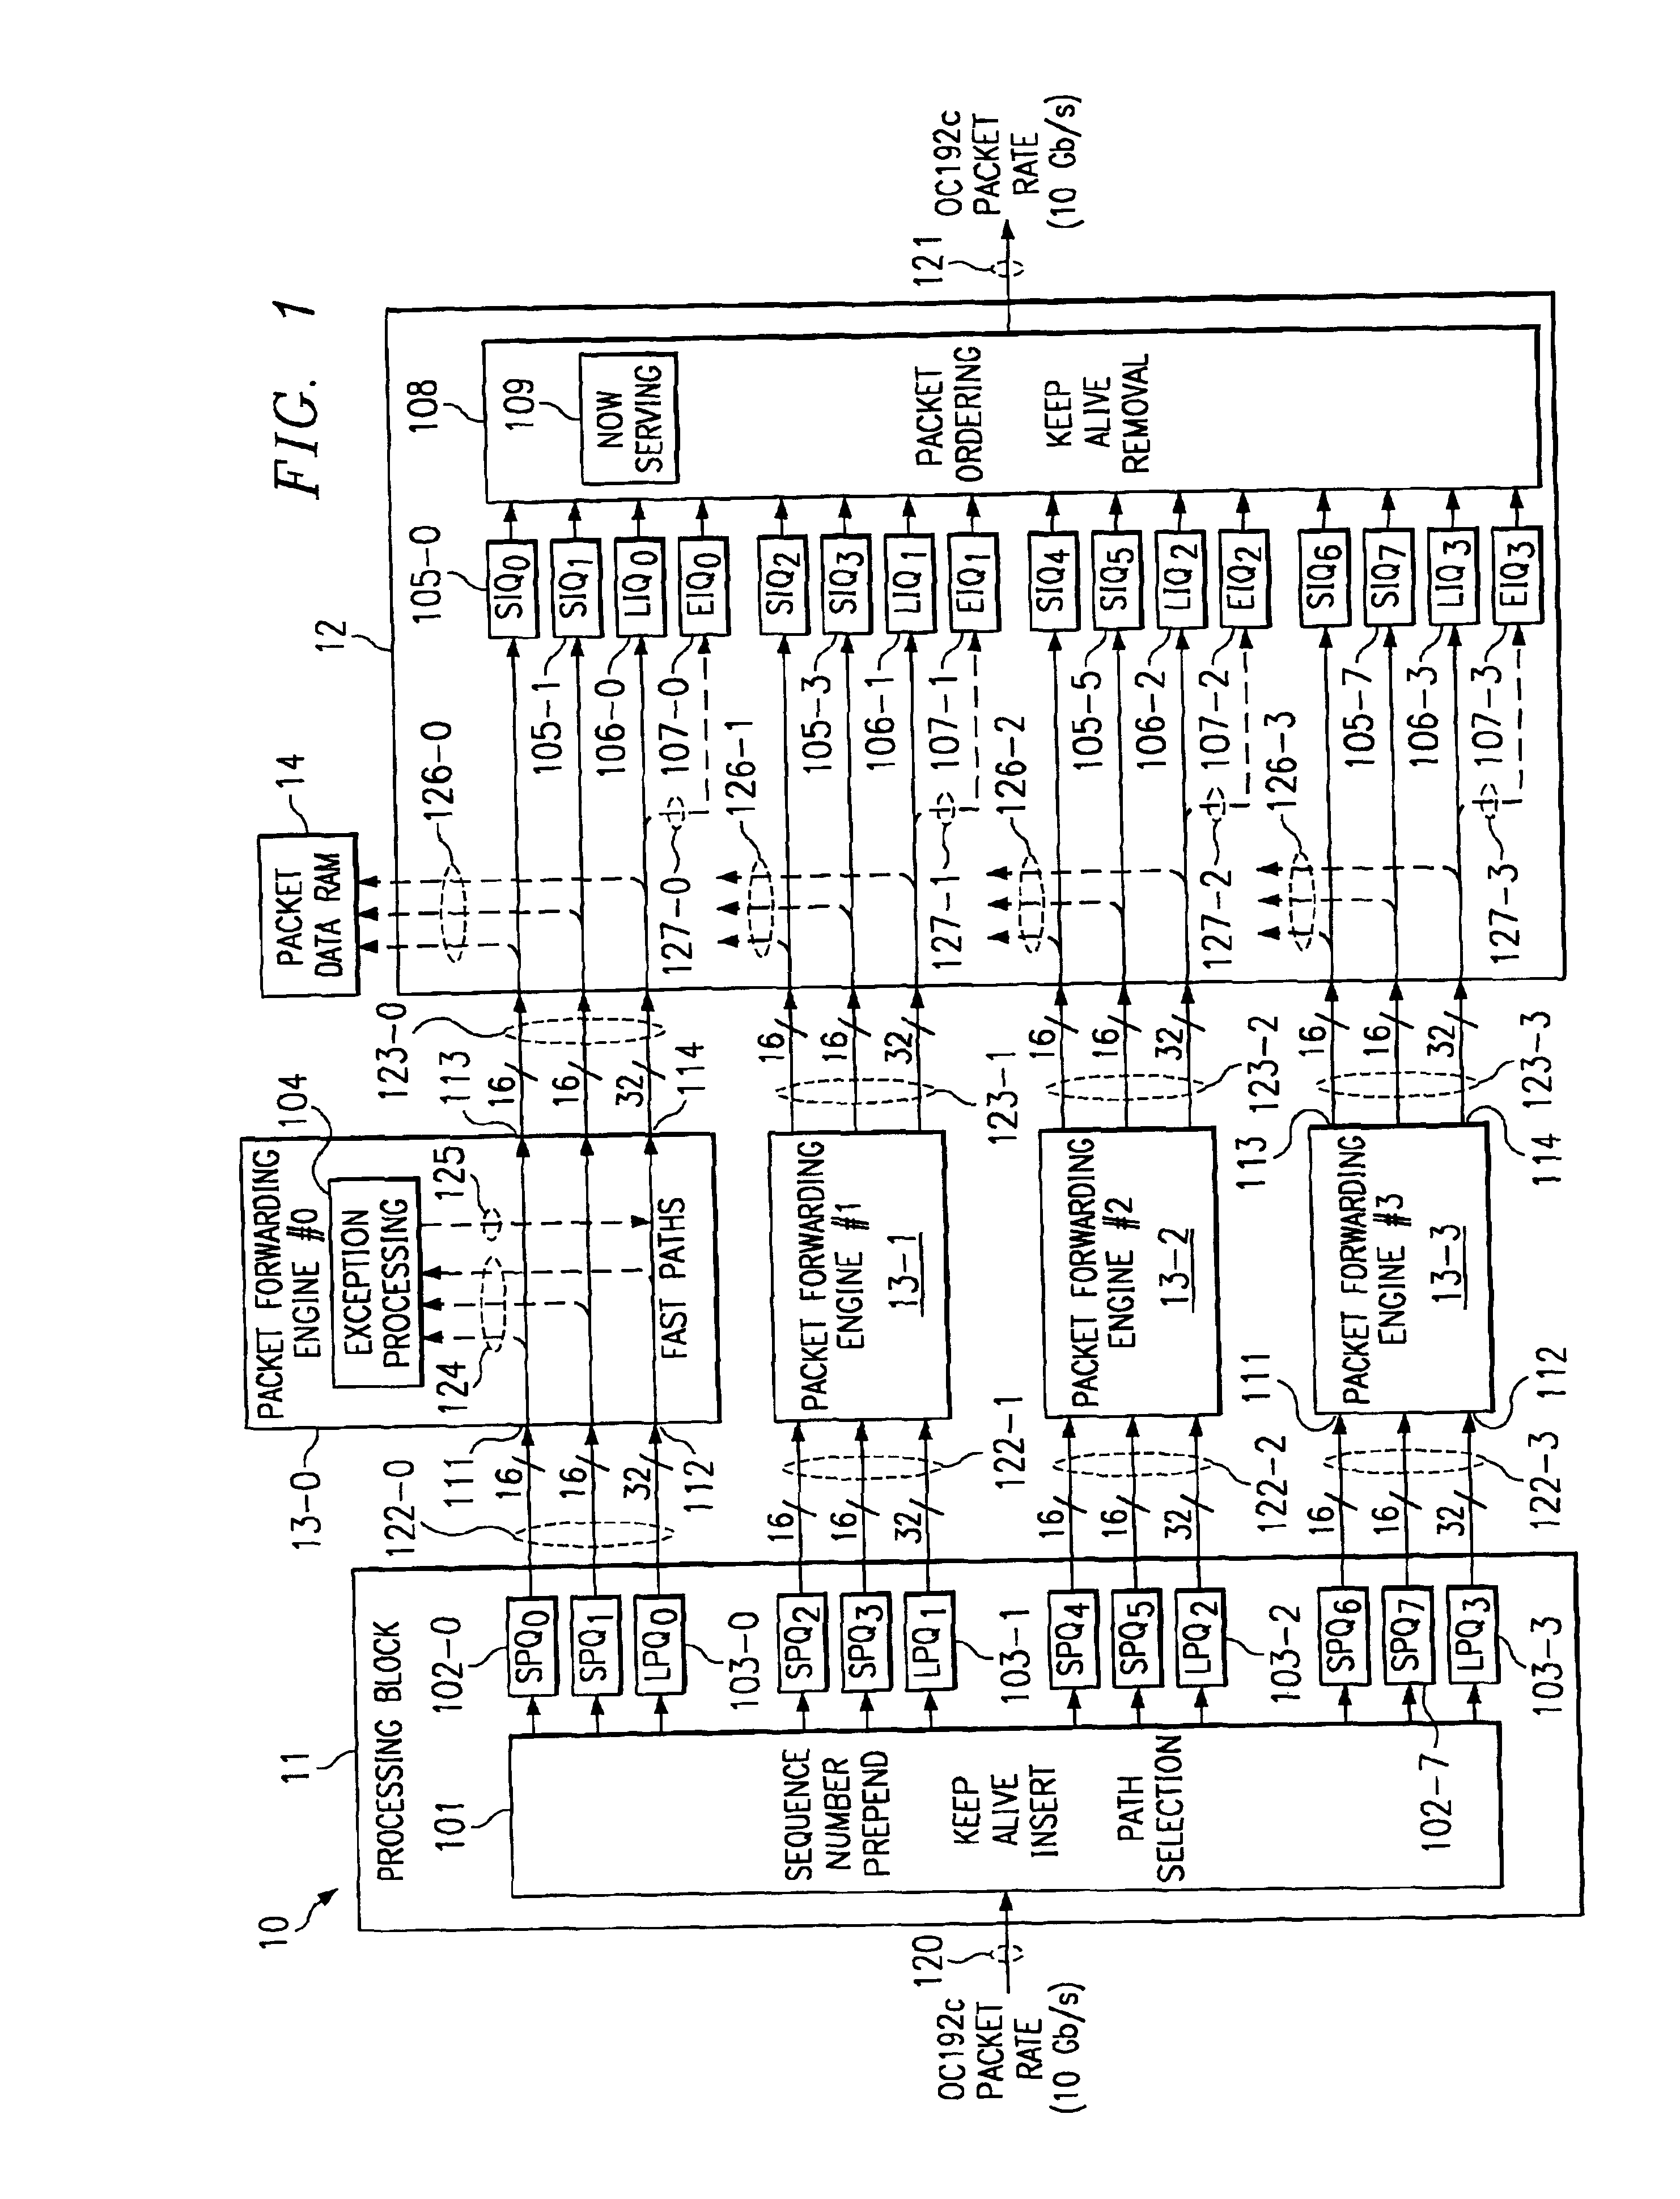 System and method for router packet control and ordering